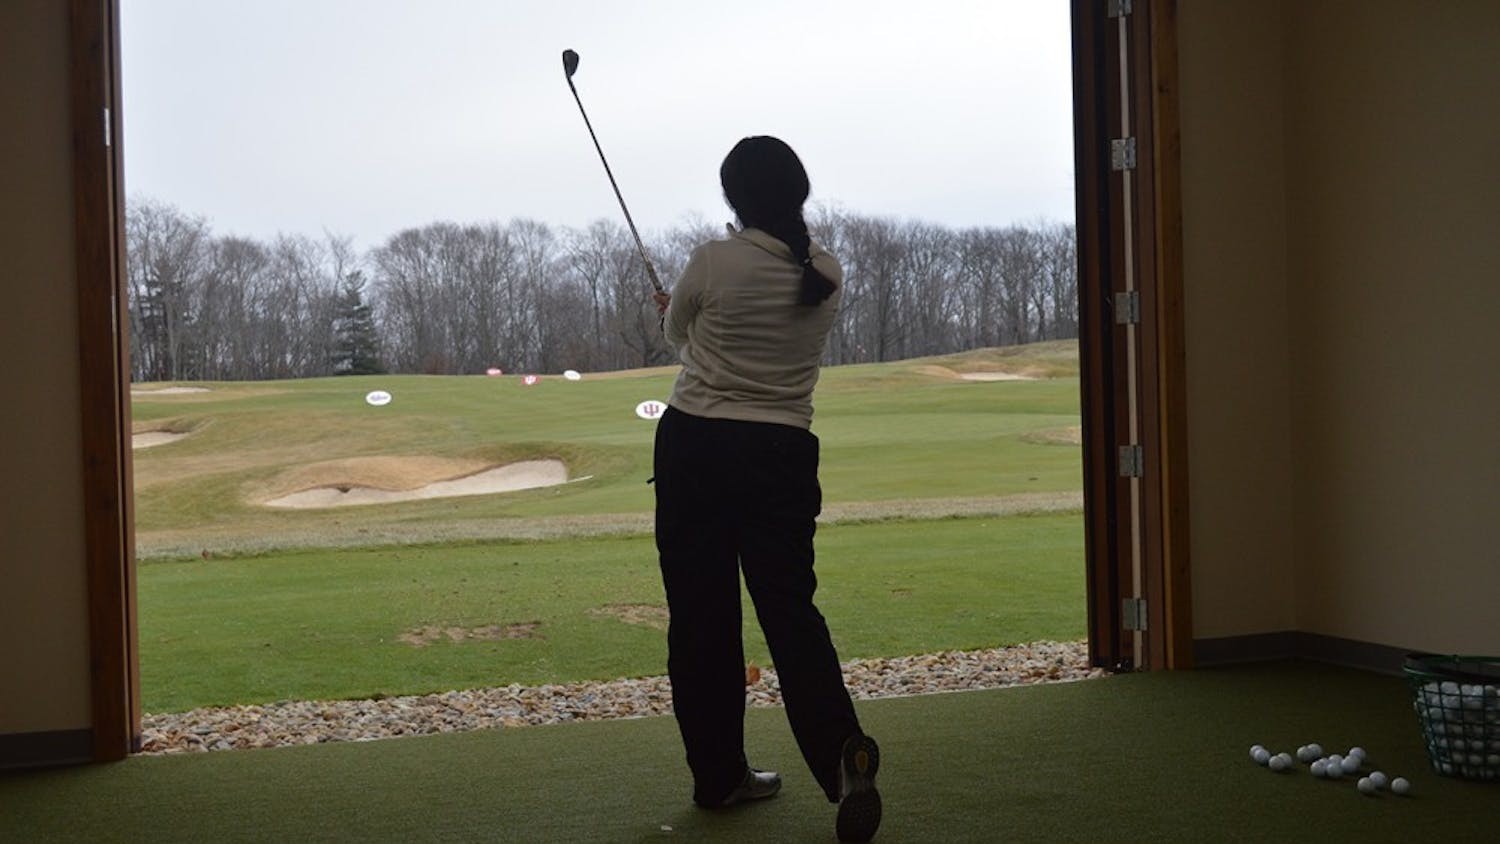 Senior Ana Sanjuan practiced her irons at IU's indoor training facility in early February. Sanjuan finished sixth place individually at the Westbrook Spring Invitational in Arizona over the weekend.